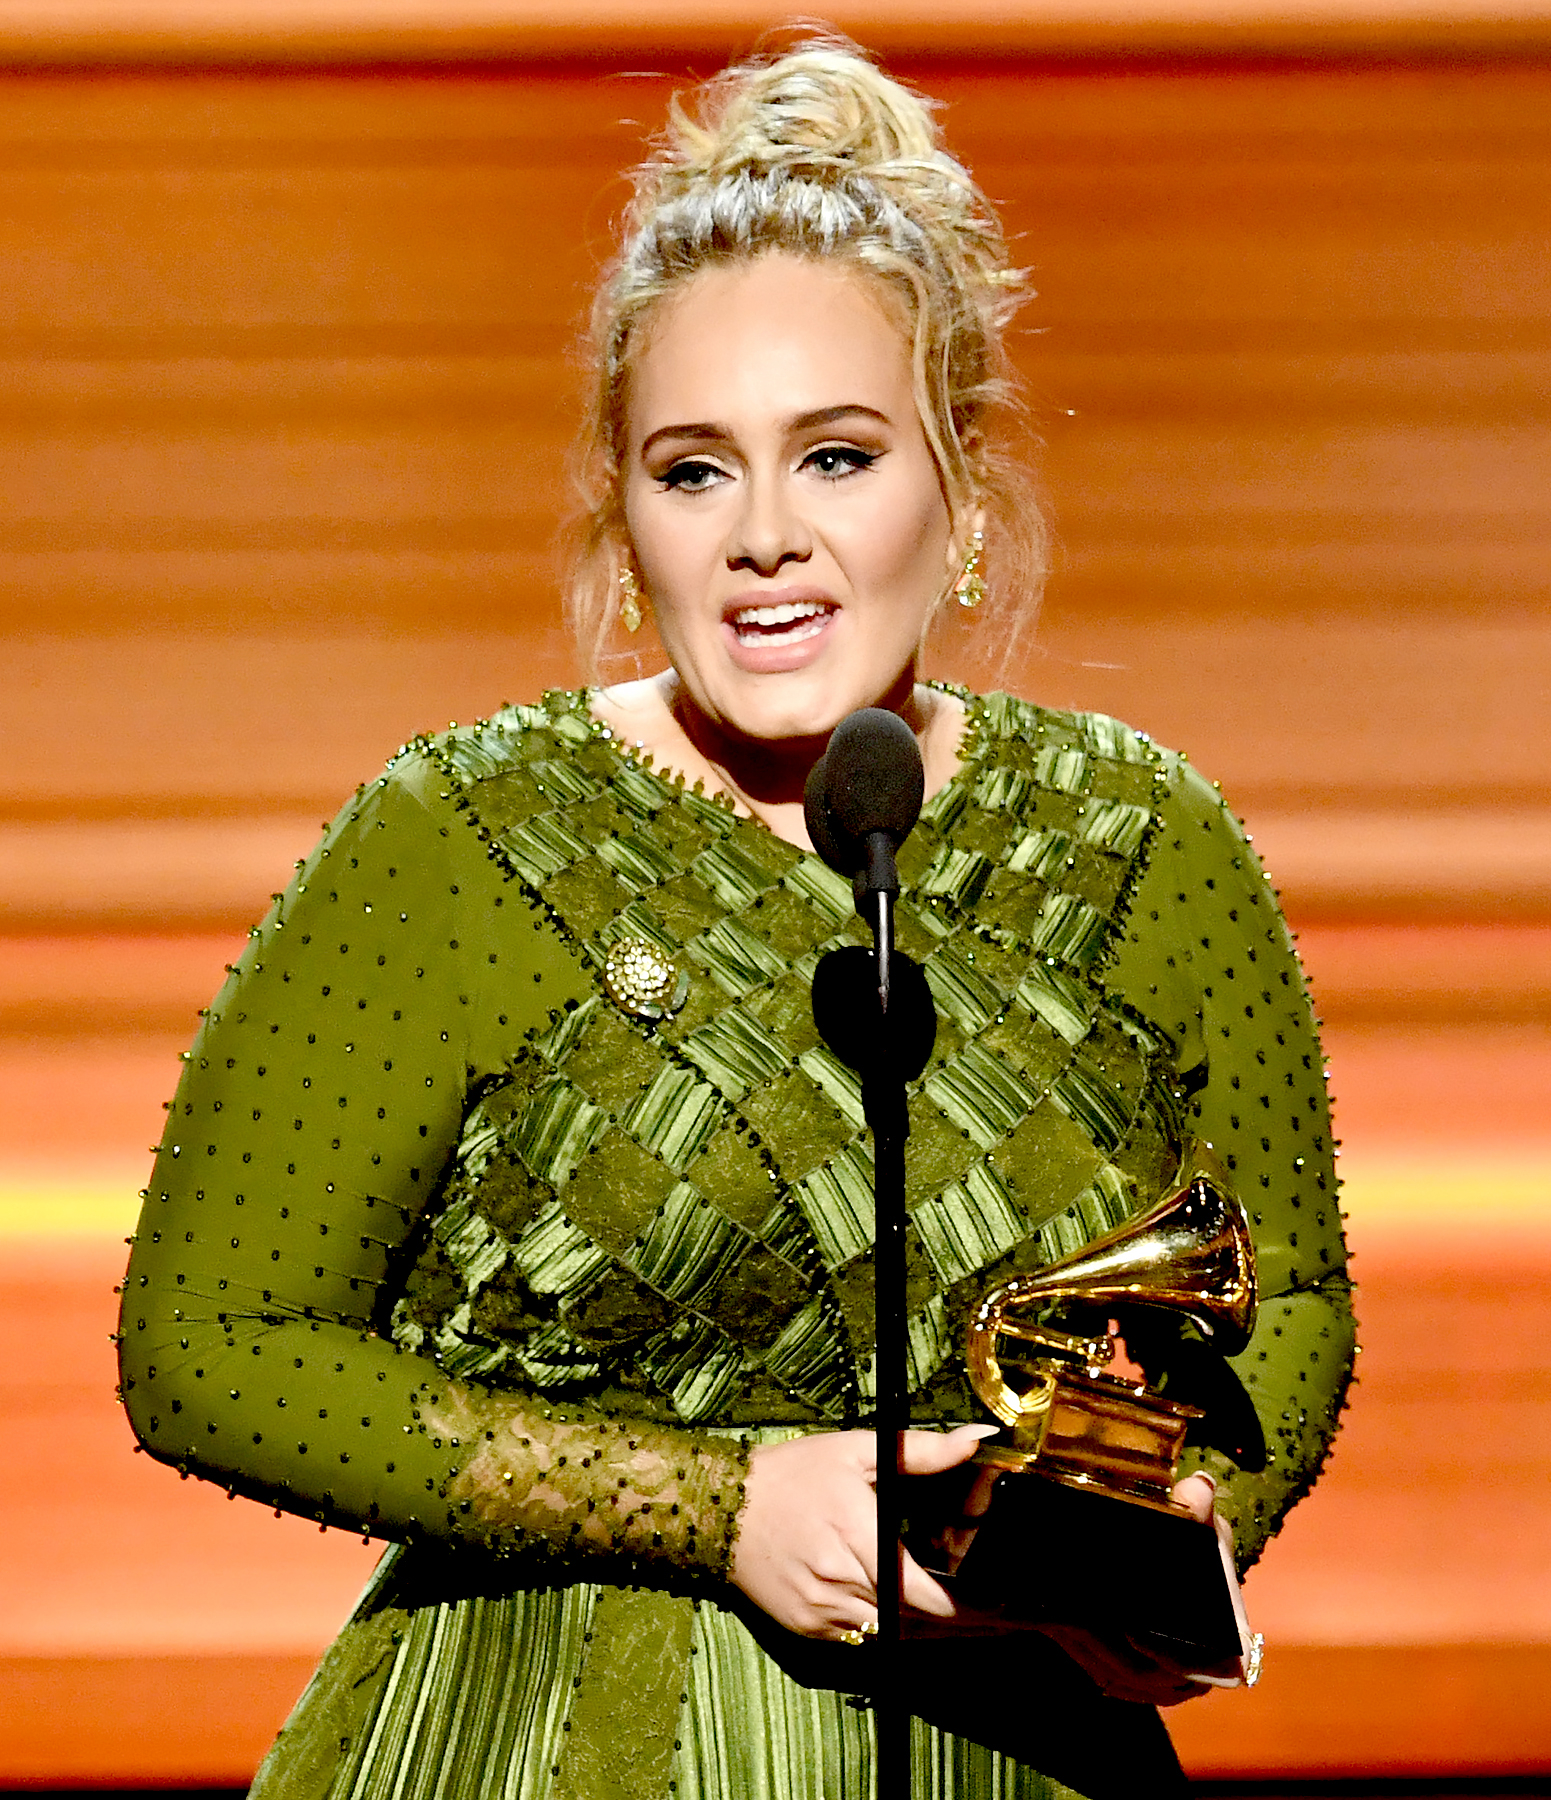 Grammys 2017 Adele Praises Beyonce After Beating Her for Album of the Year